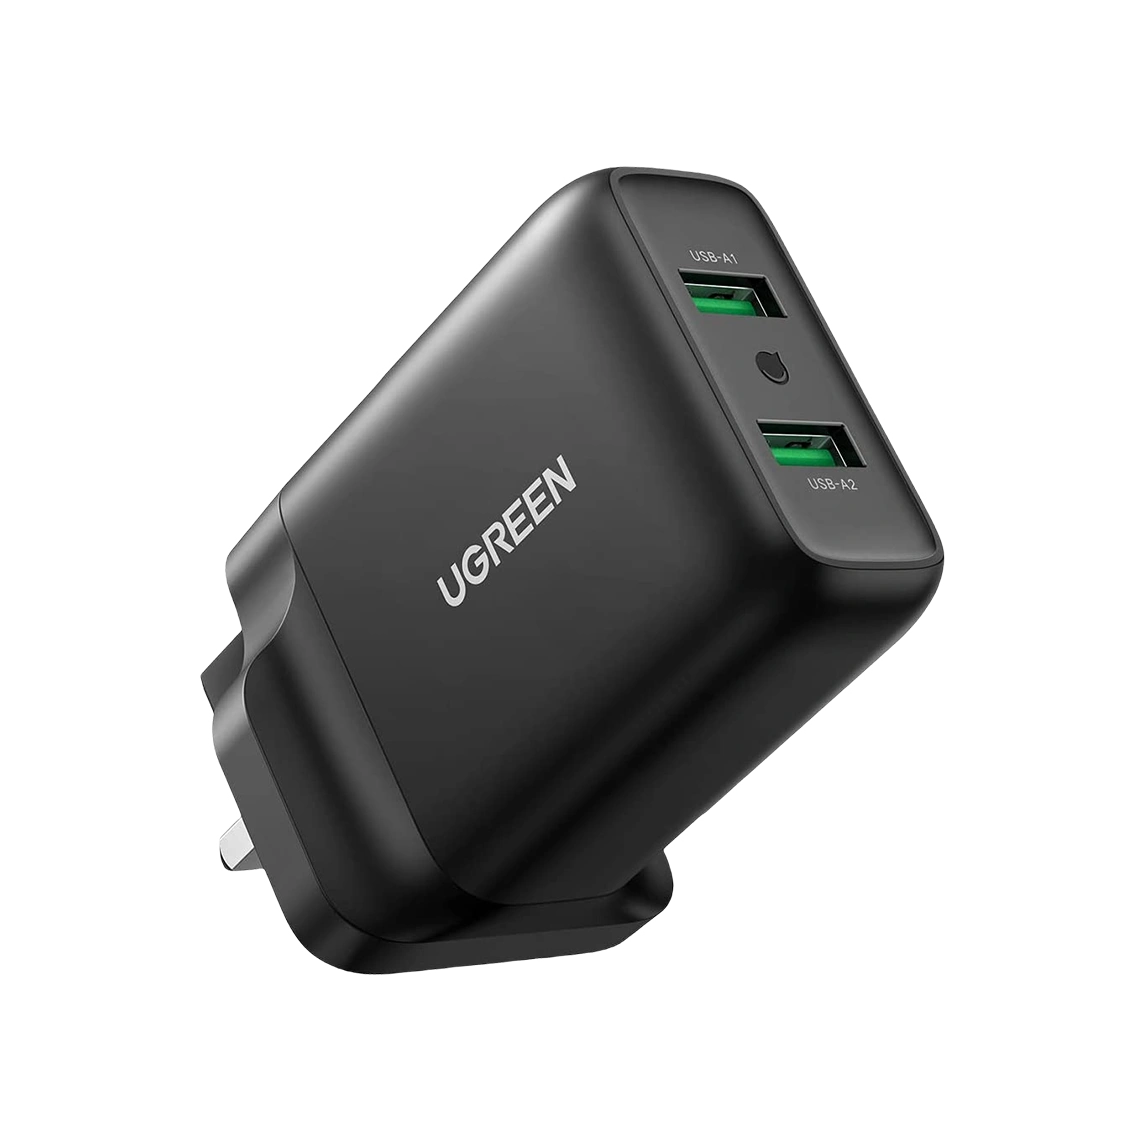 UGREEN USB Charger 36W QC 3.0 Quick Wall Charger Adapter 2-Port USB Travel 70164